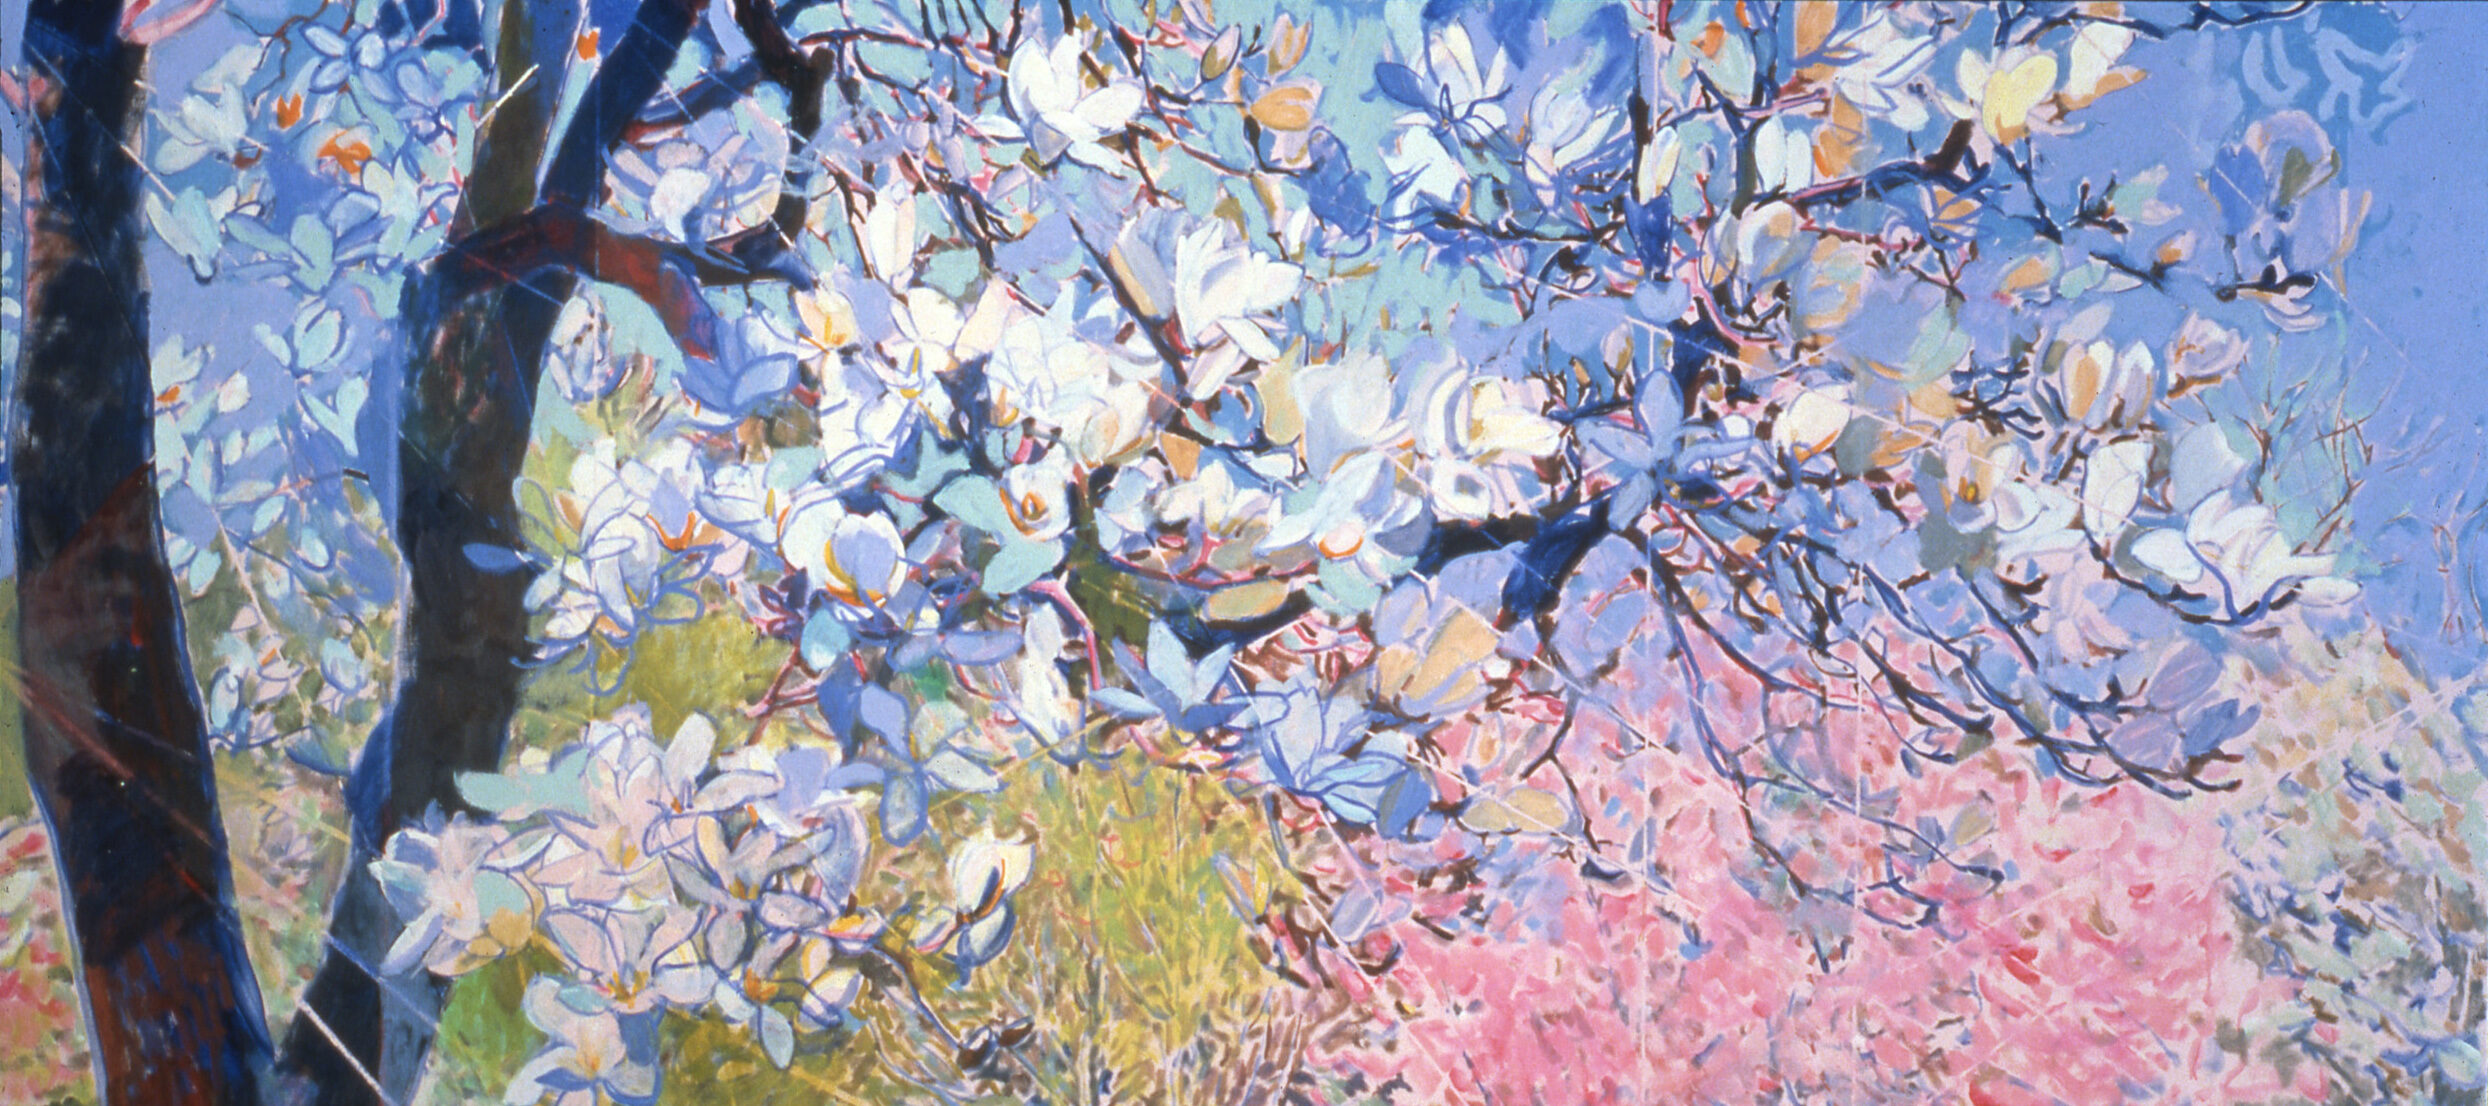 An oil painting of a springtime scene. In the foreground is a tree full of white flowers. The background is full of trees with pastel pink flowers and green leaves.